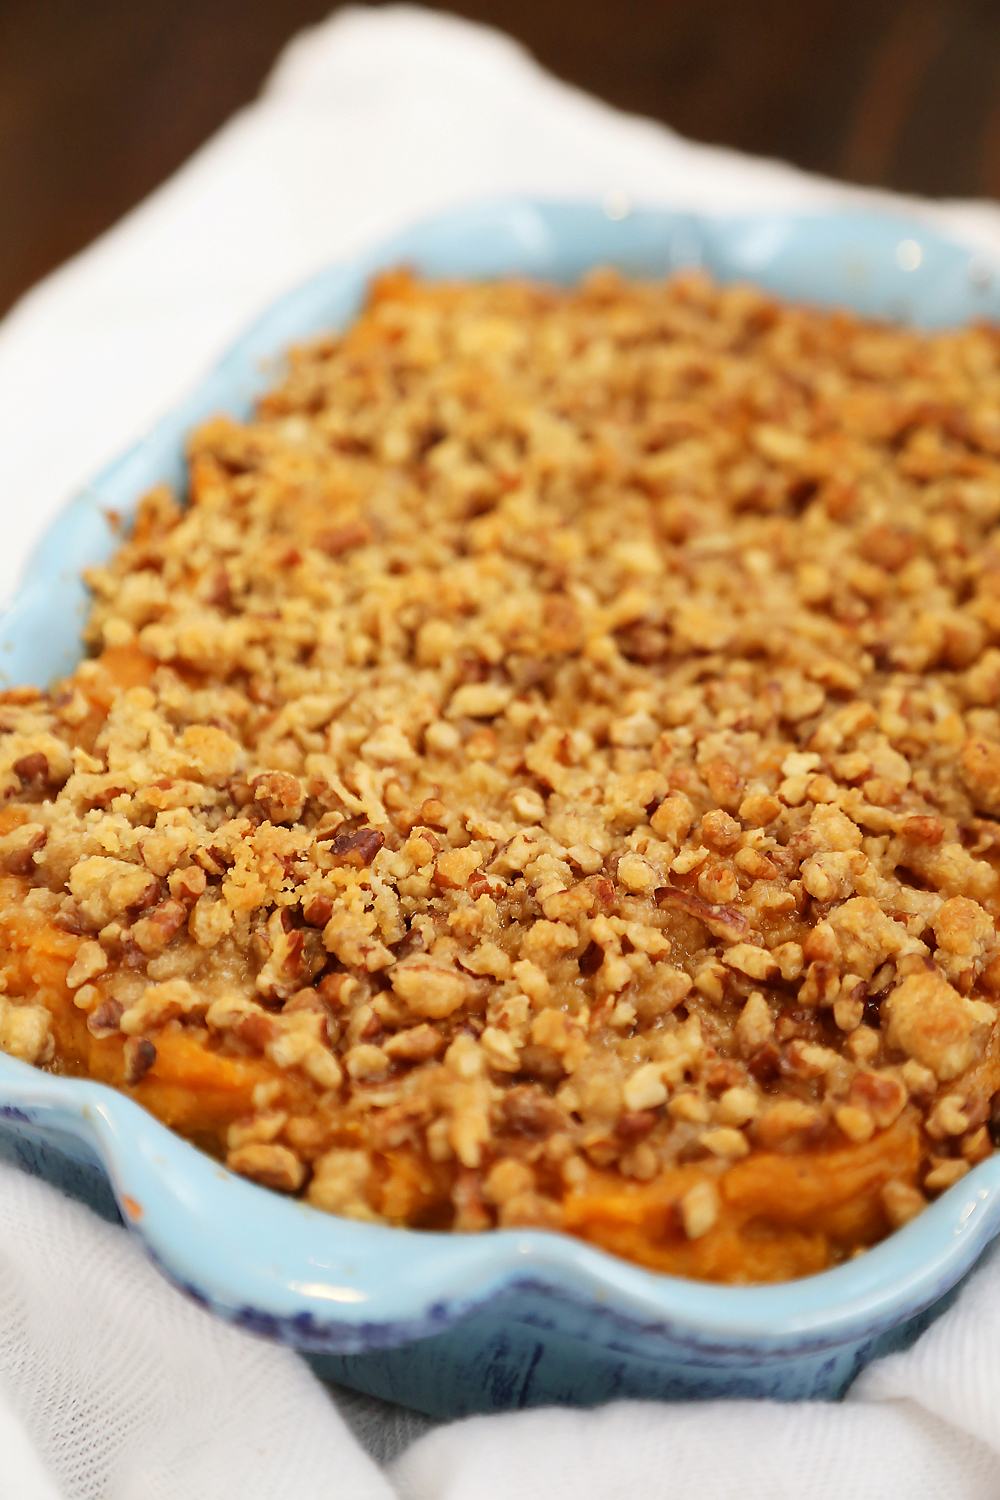 Buttery Brown Sugar Sweet Potato Casserole - Creamy, smooth sweet potato side with streusel topping is easy + sure to hit the spot for holiday feasting! thecomfortofcooking.com